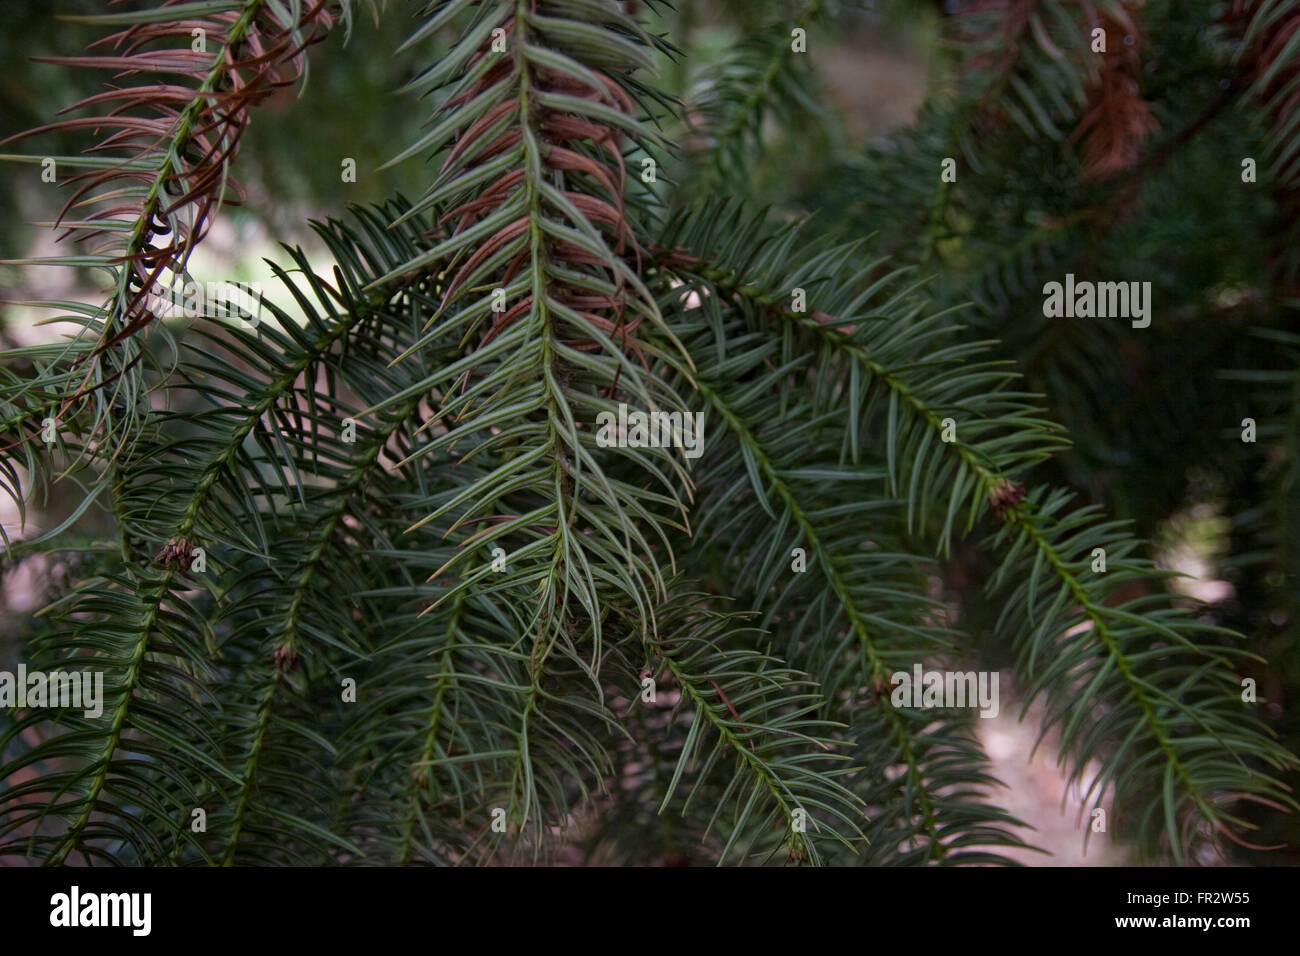 China fir tree leaves close up Stock Photo